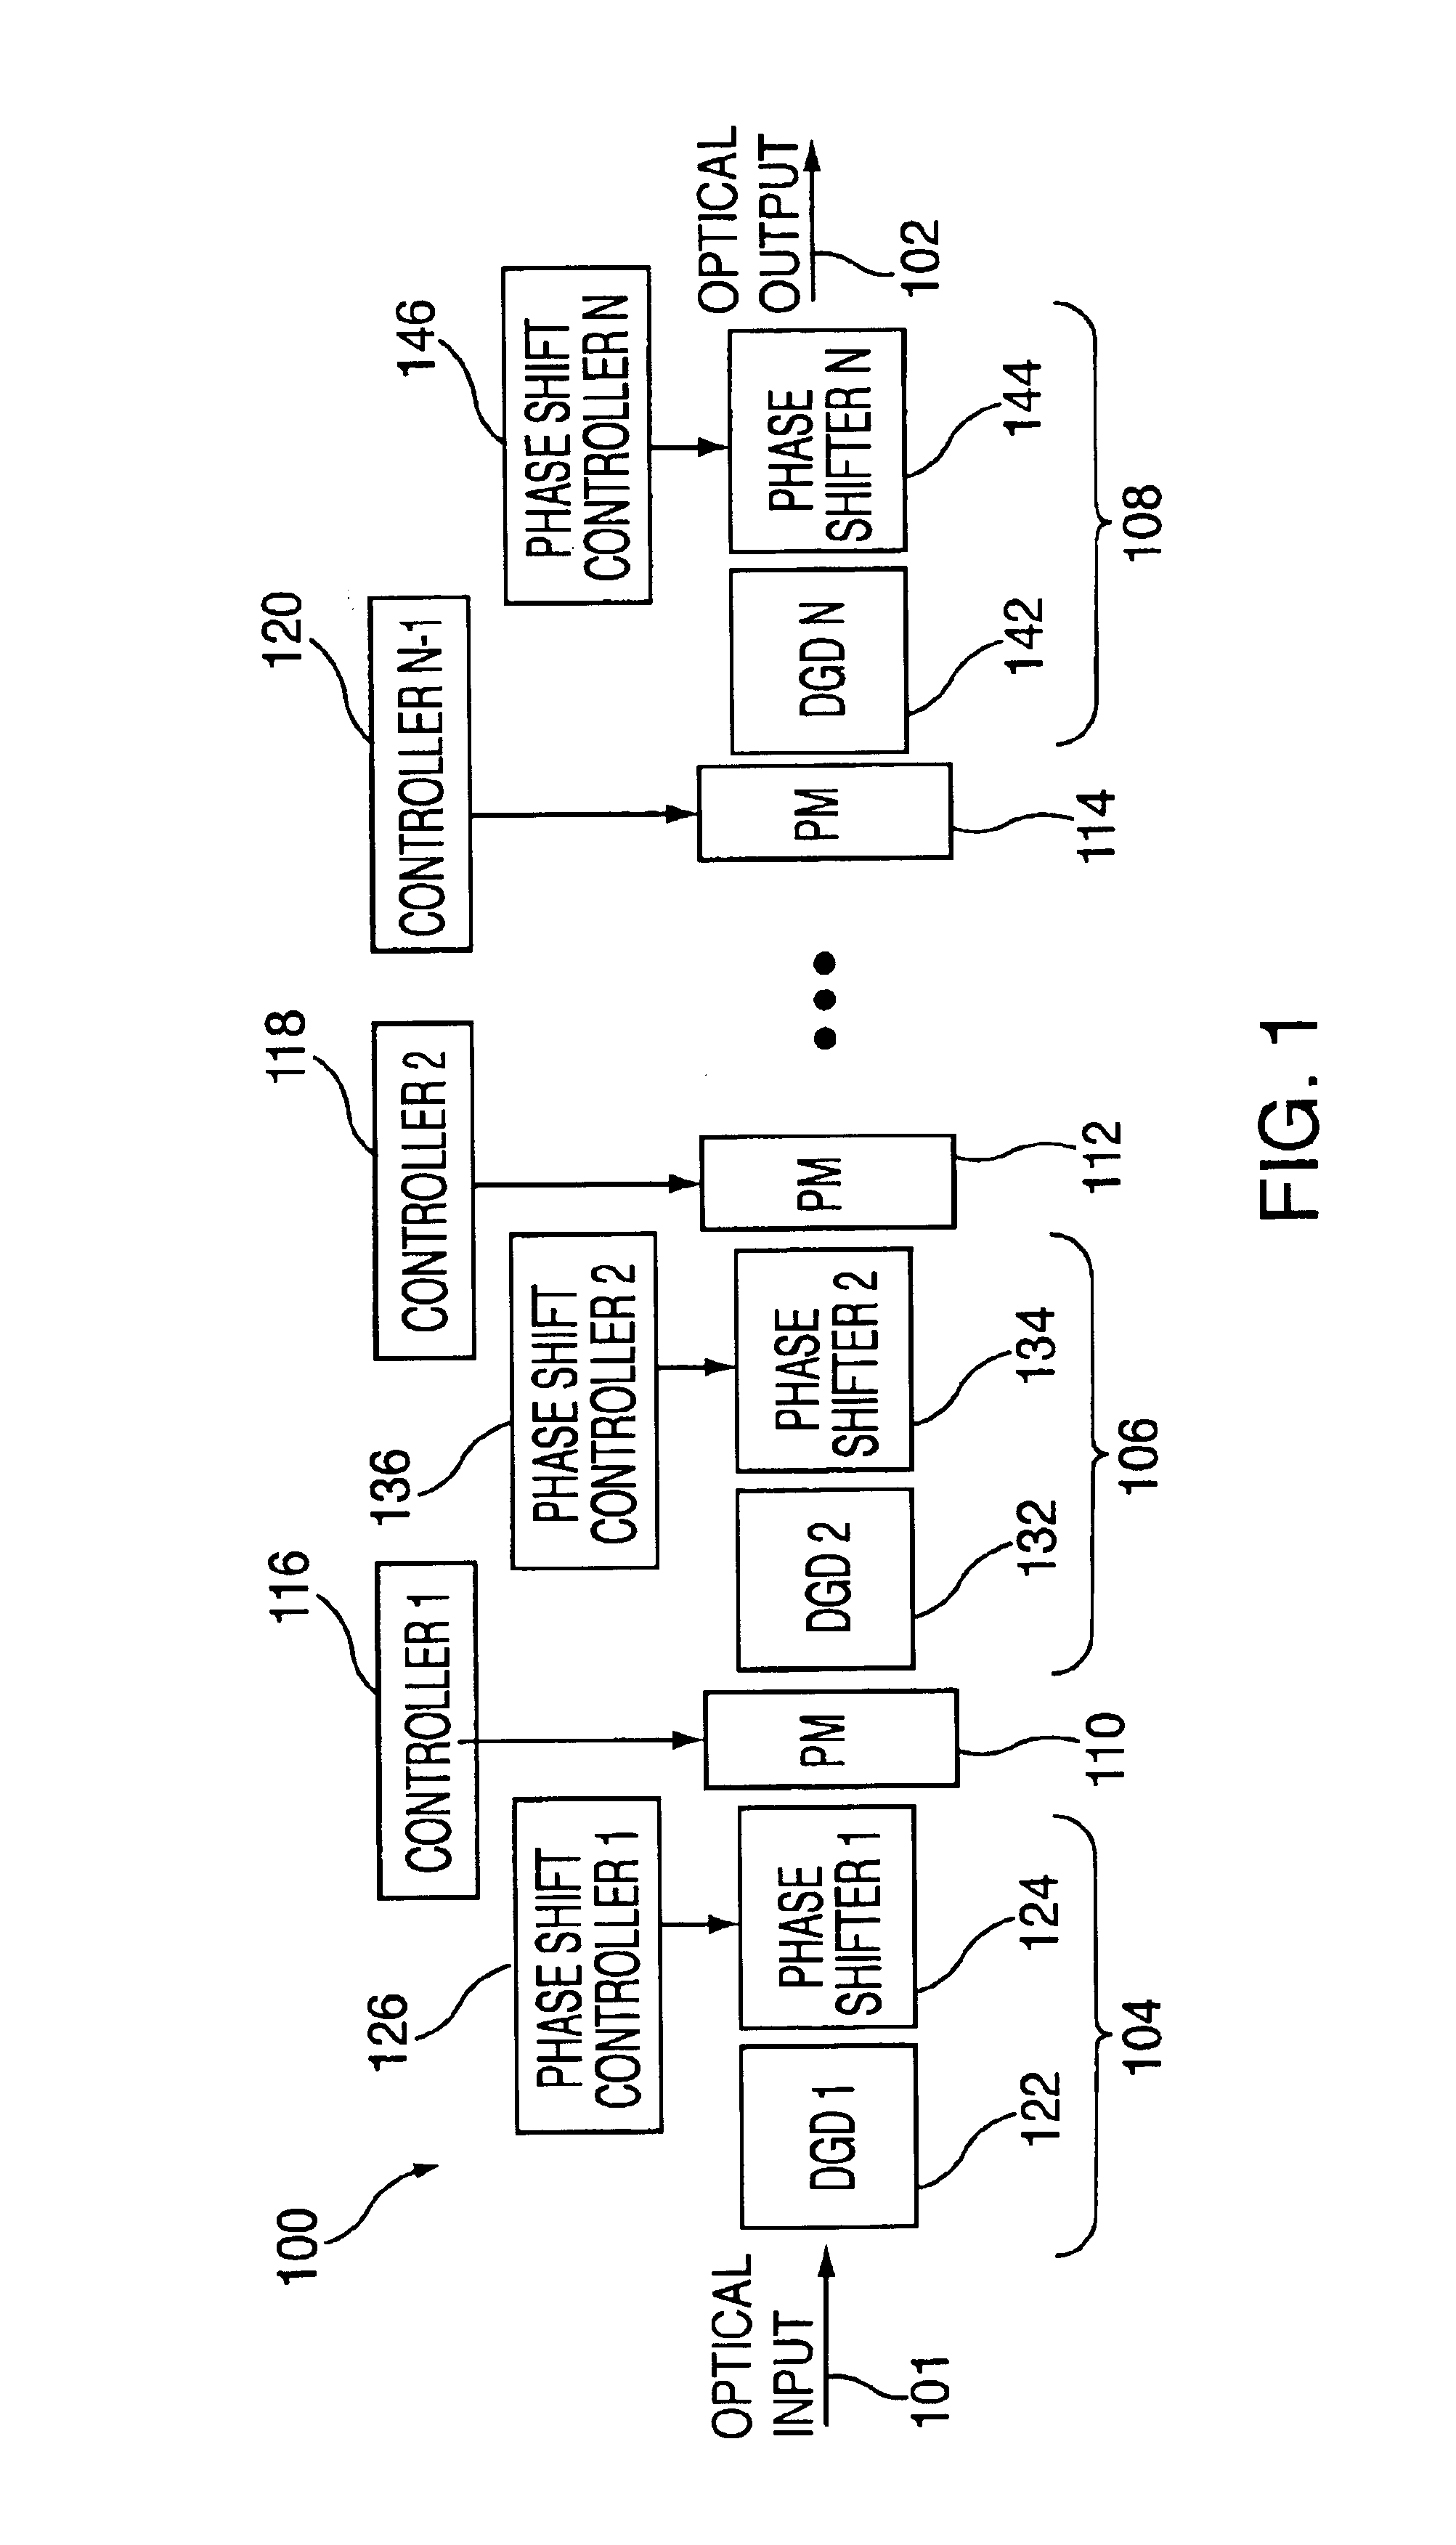 Methods and apparatus for frequency shifting polarization mode dispersion spectra